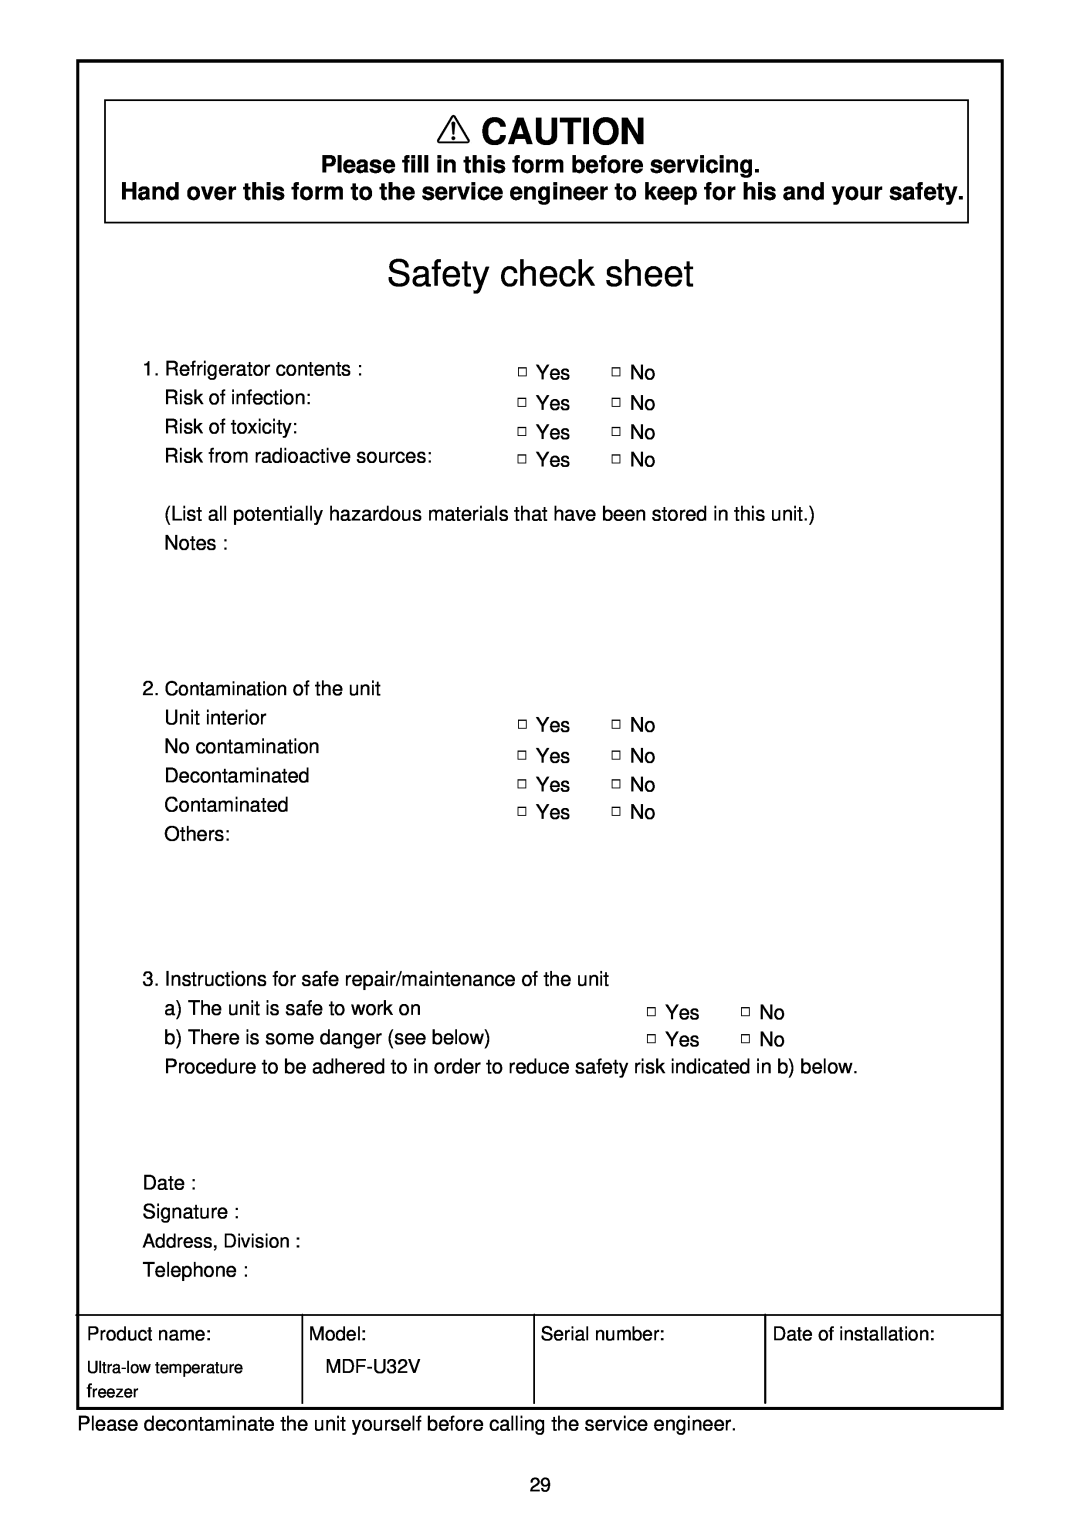 Sanyo MDF-U32V instruction manual Safety check sheet, Please fill in this form before servicing 